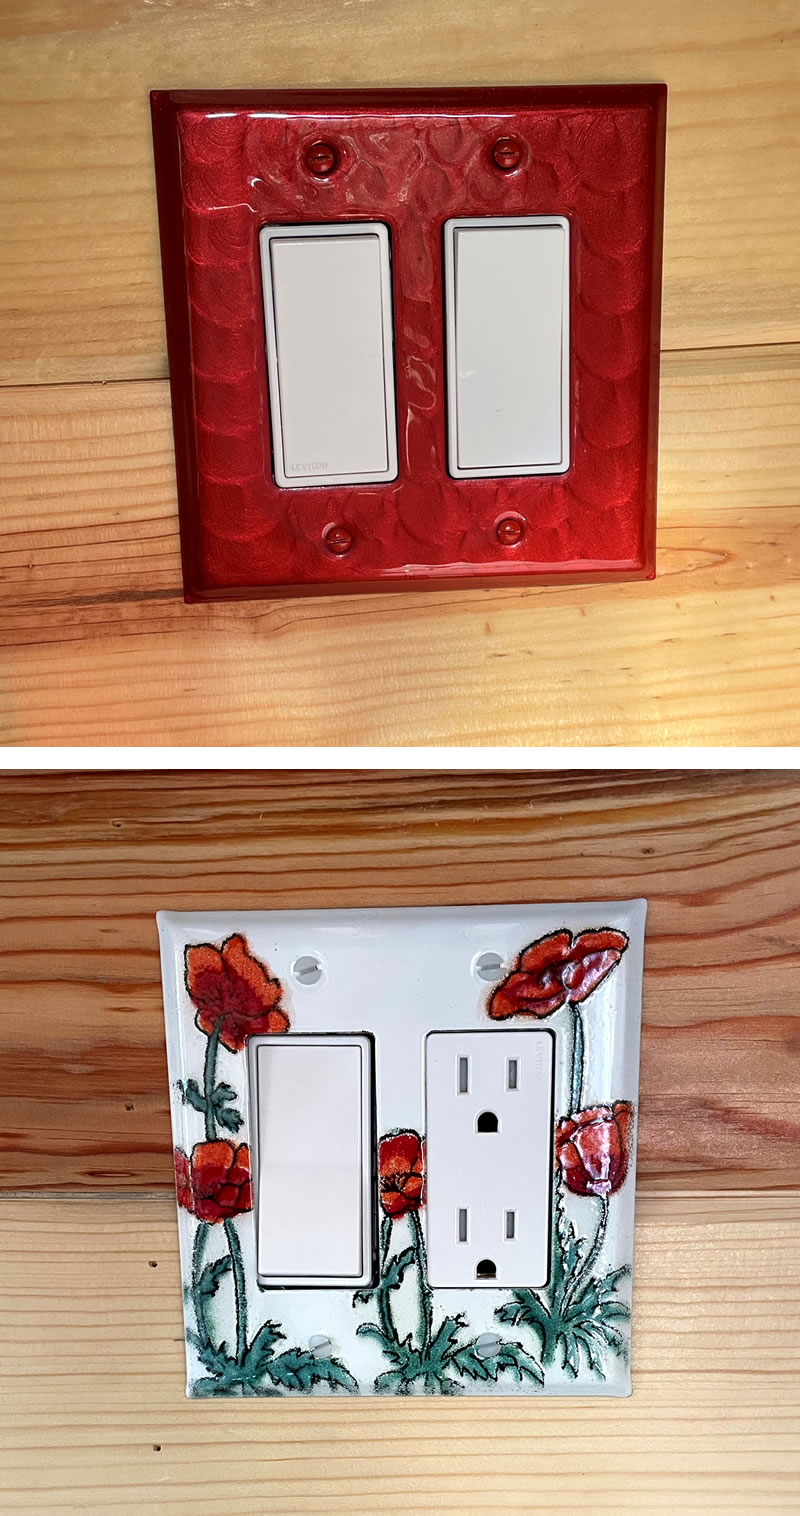 Two wall switchplates for turning on lights, one solid red, the other with red flower art.